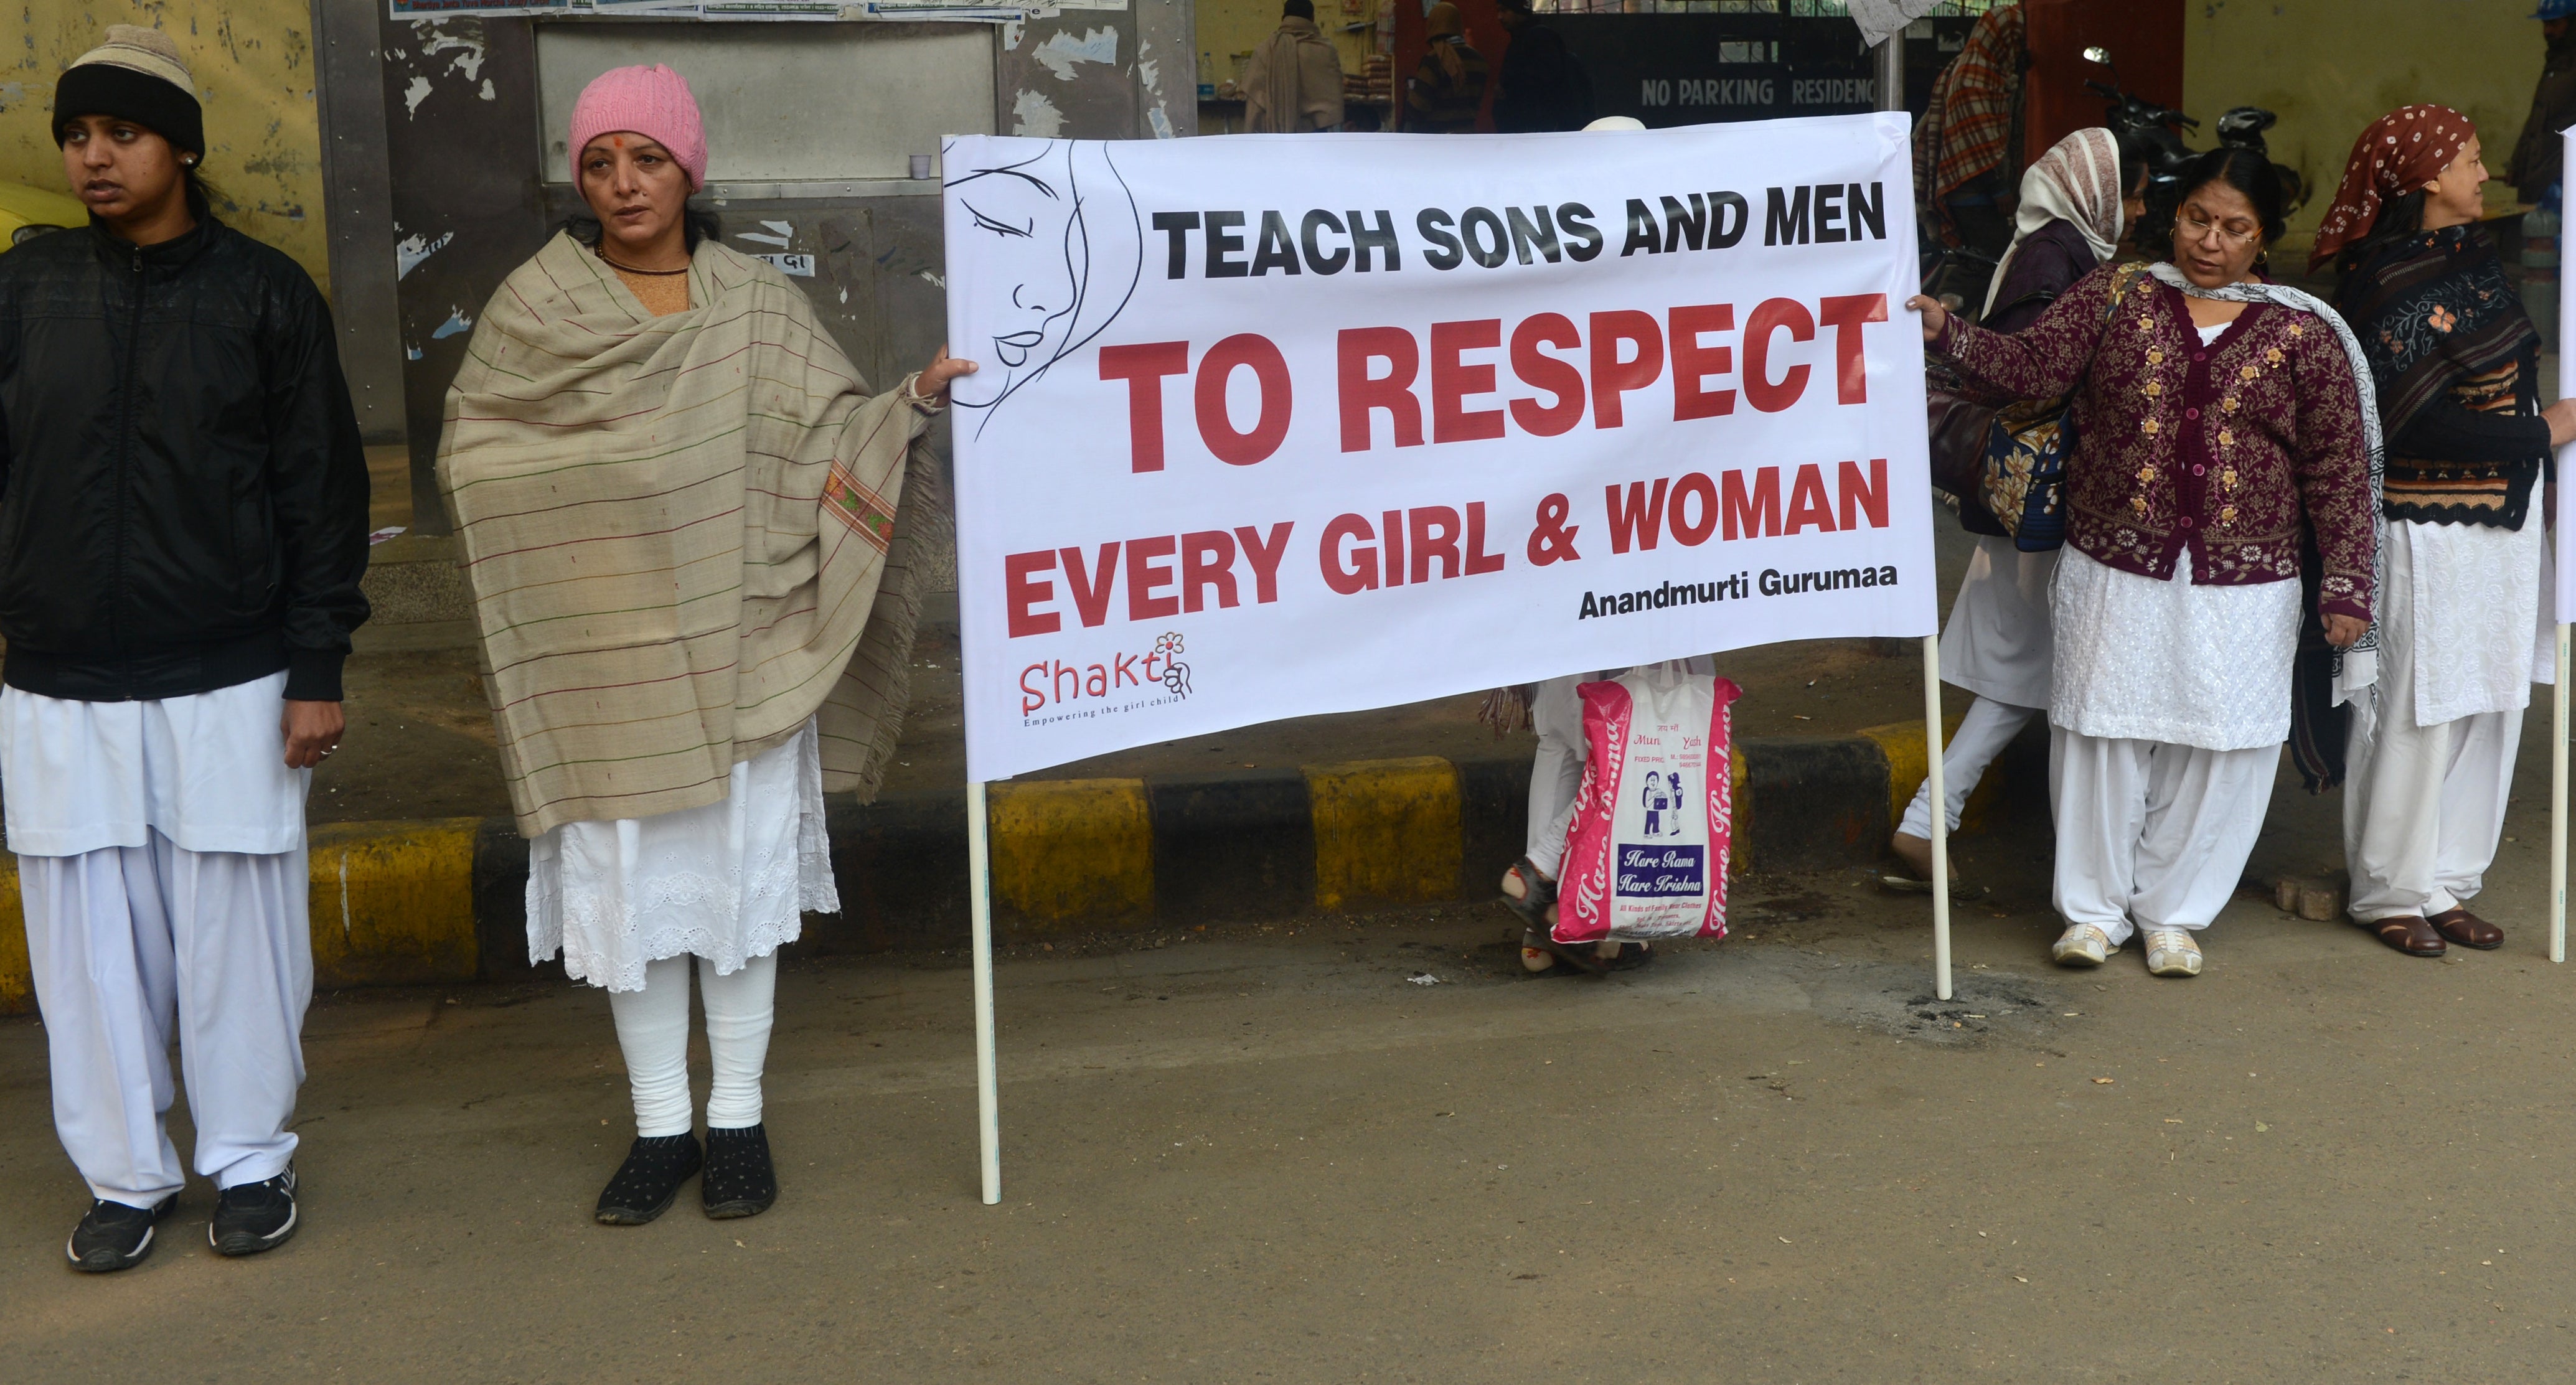 People gather to protest violence against women in New Delhi